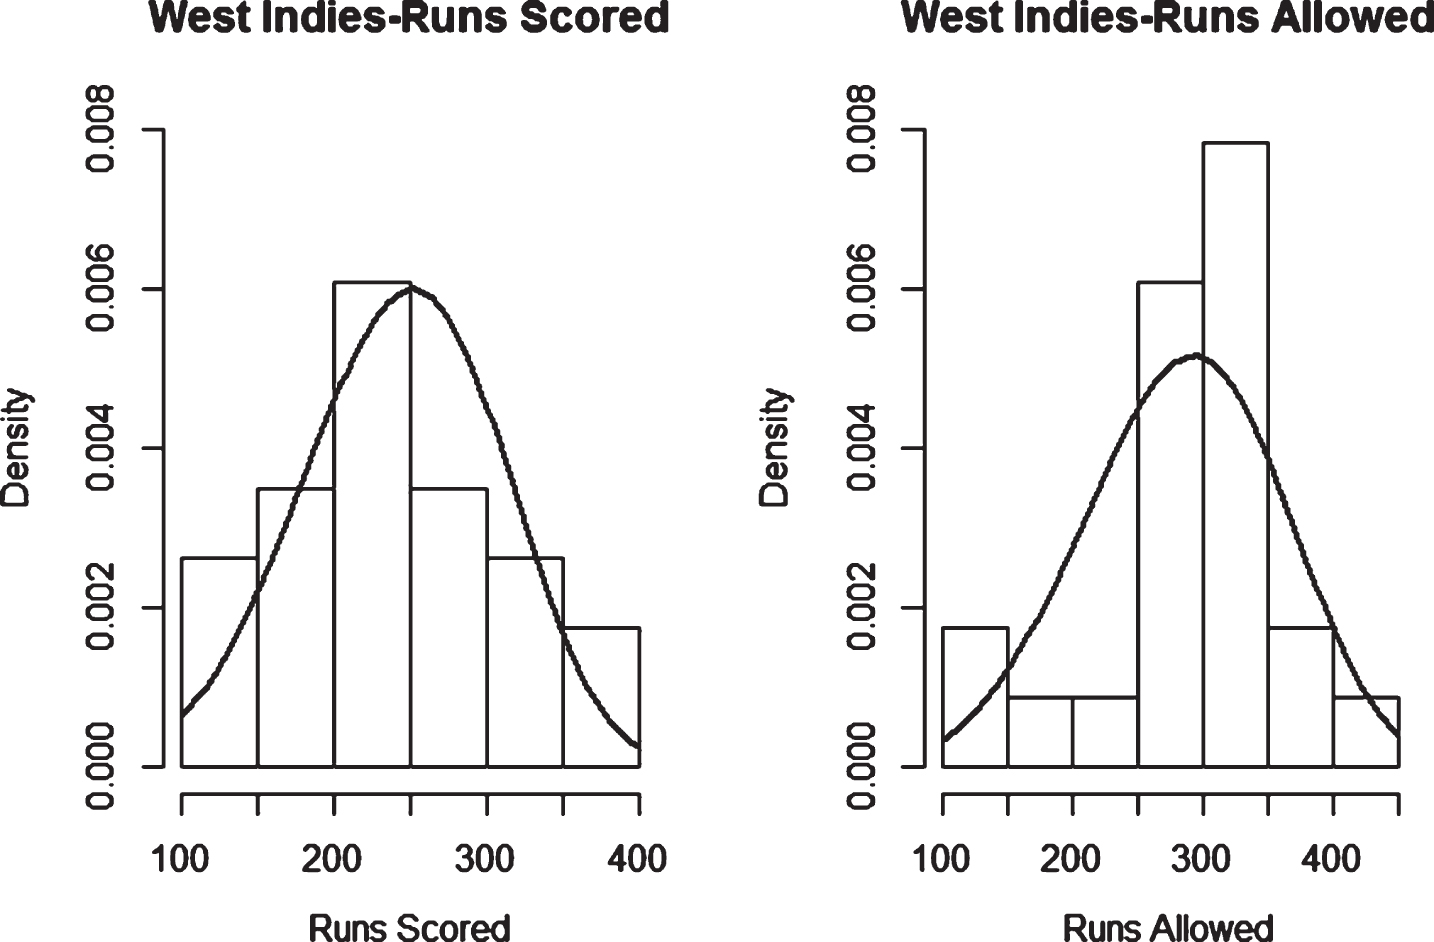 Weibull Distribution Fit for Runs Scored and Runs Allowed for West Indies using Maximum Likelihood Method (ODI).